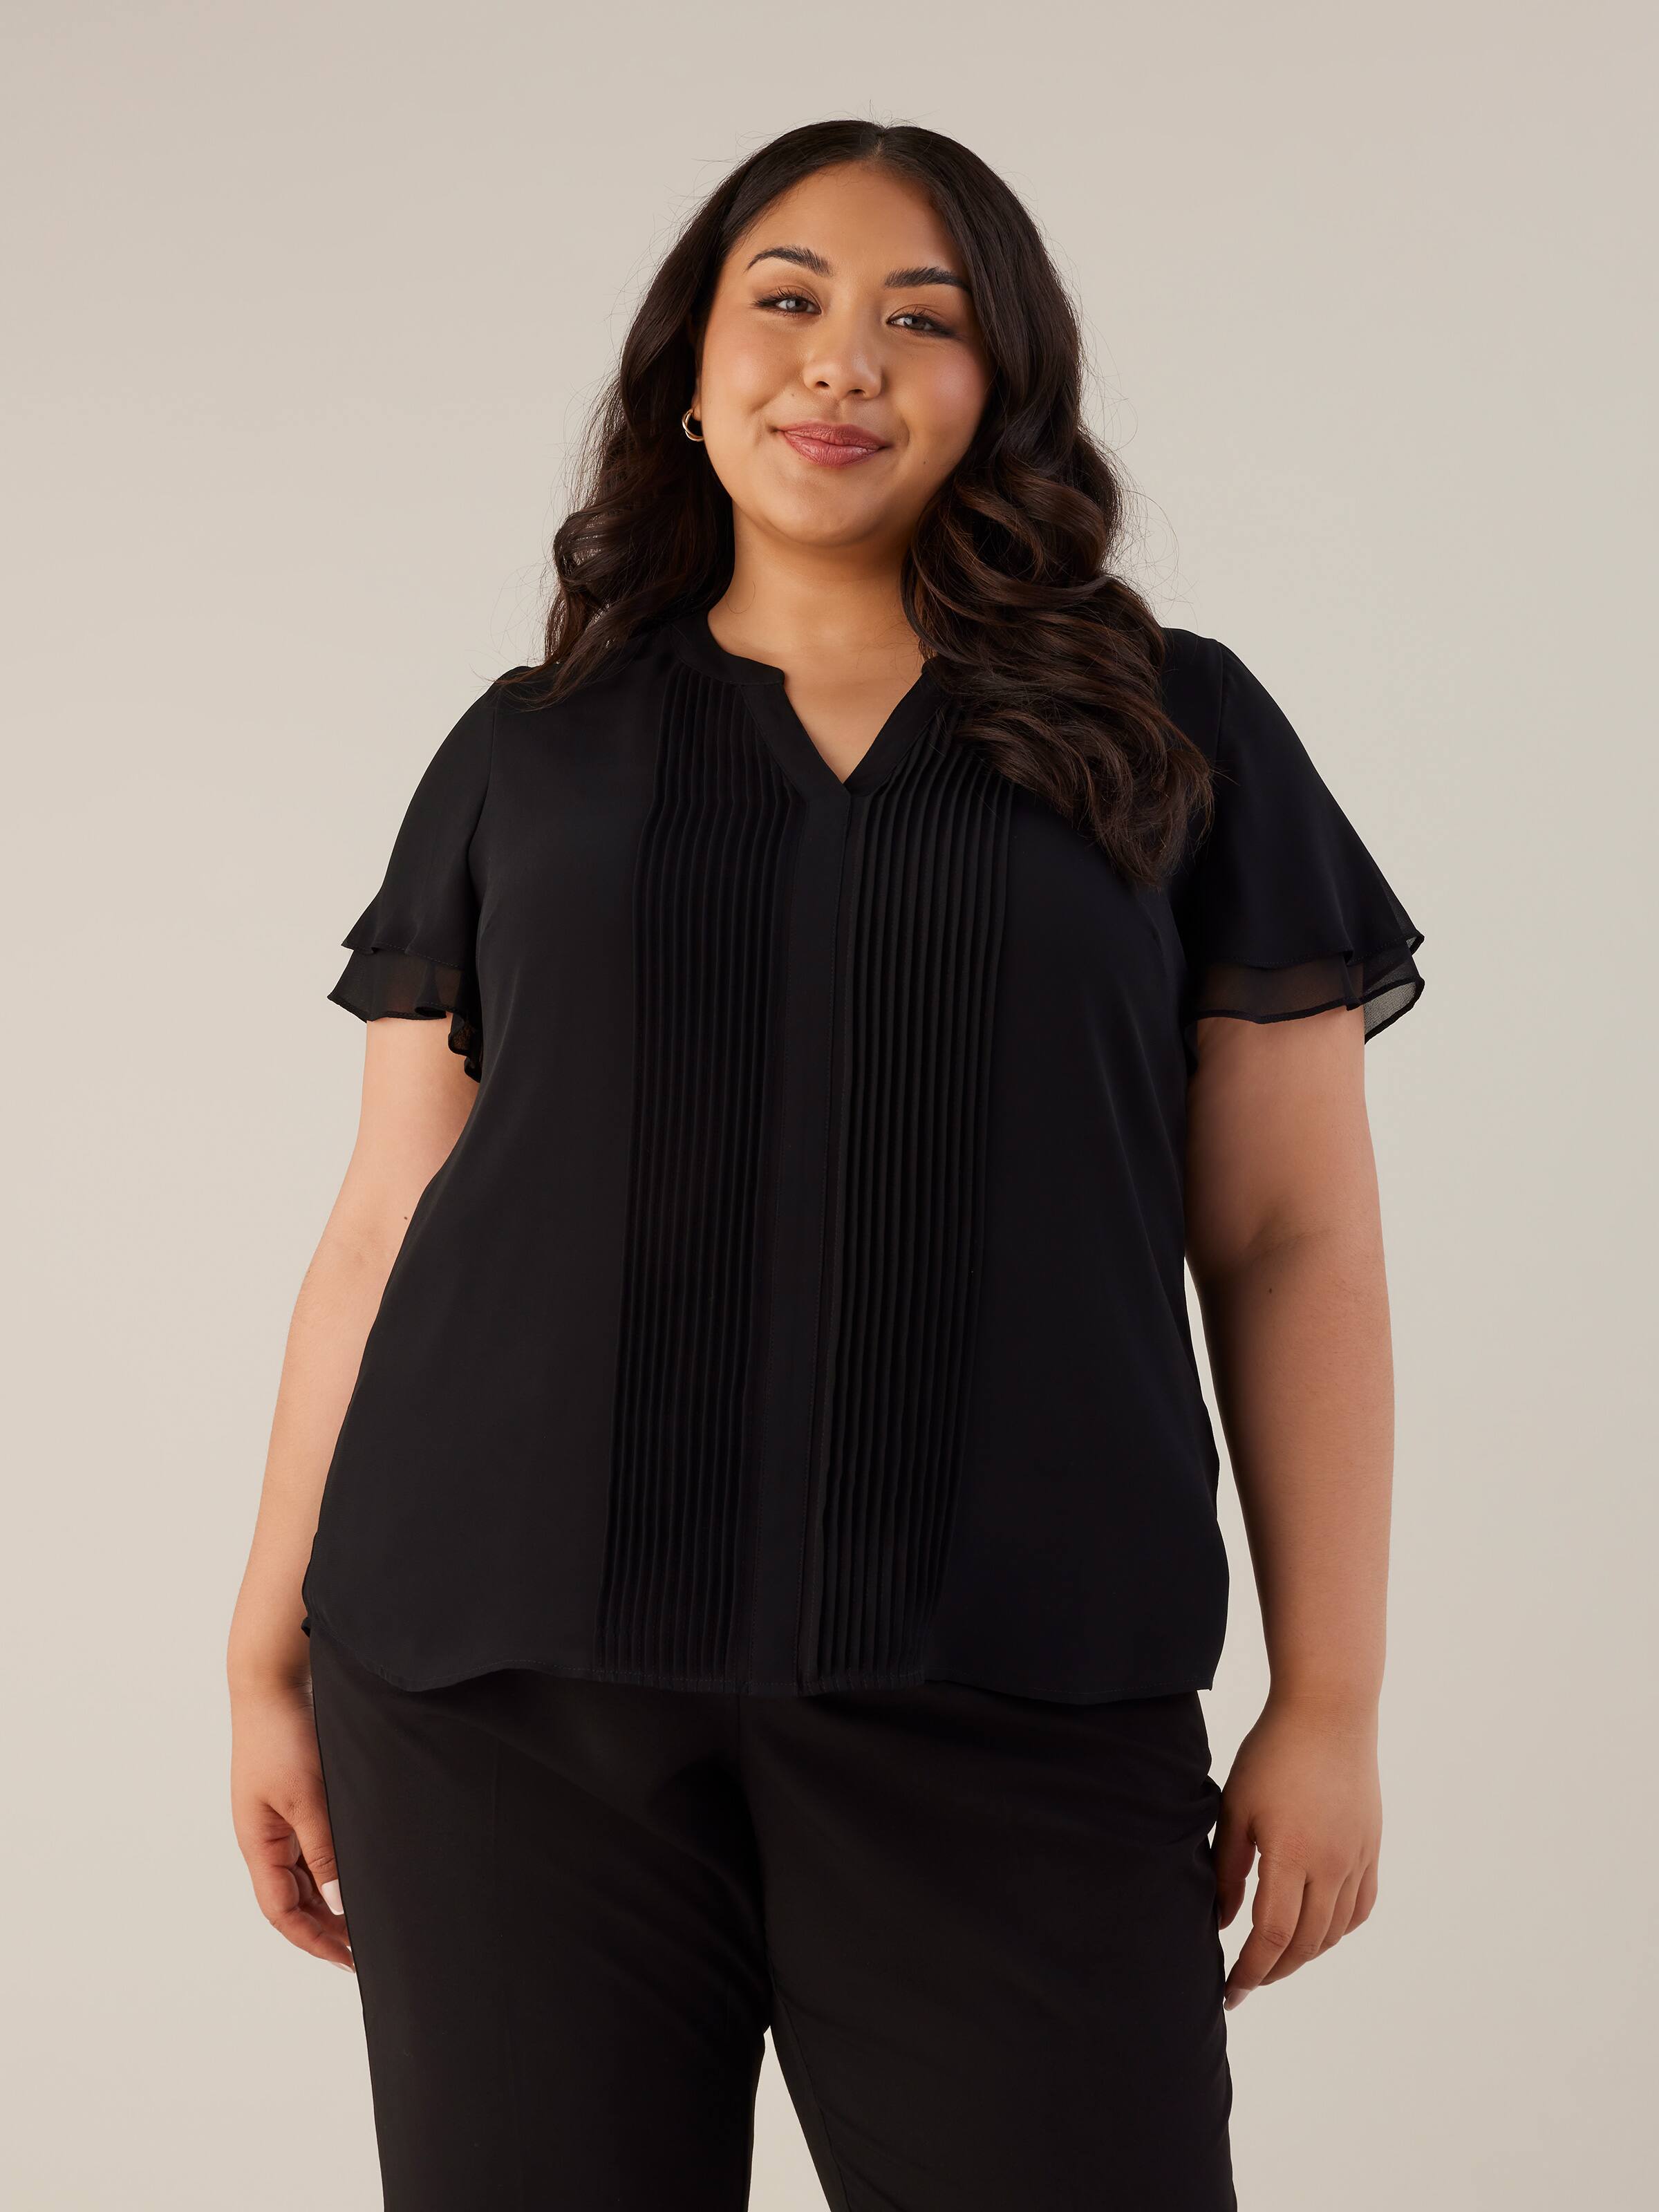 Shop Plus Size Chiffon Overlay Floral Tunic in Black